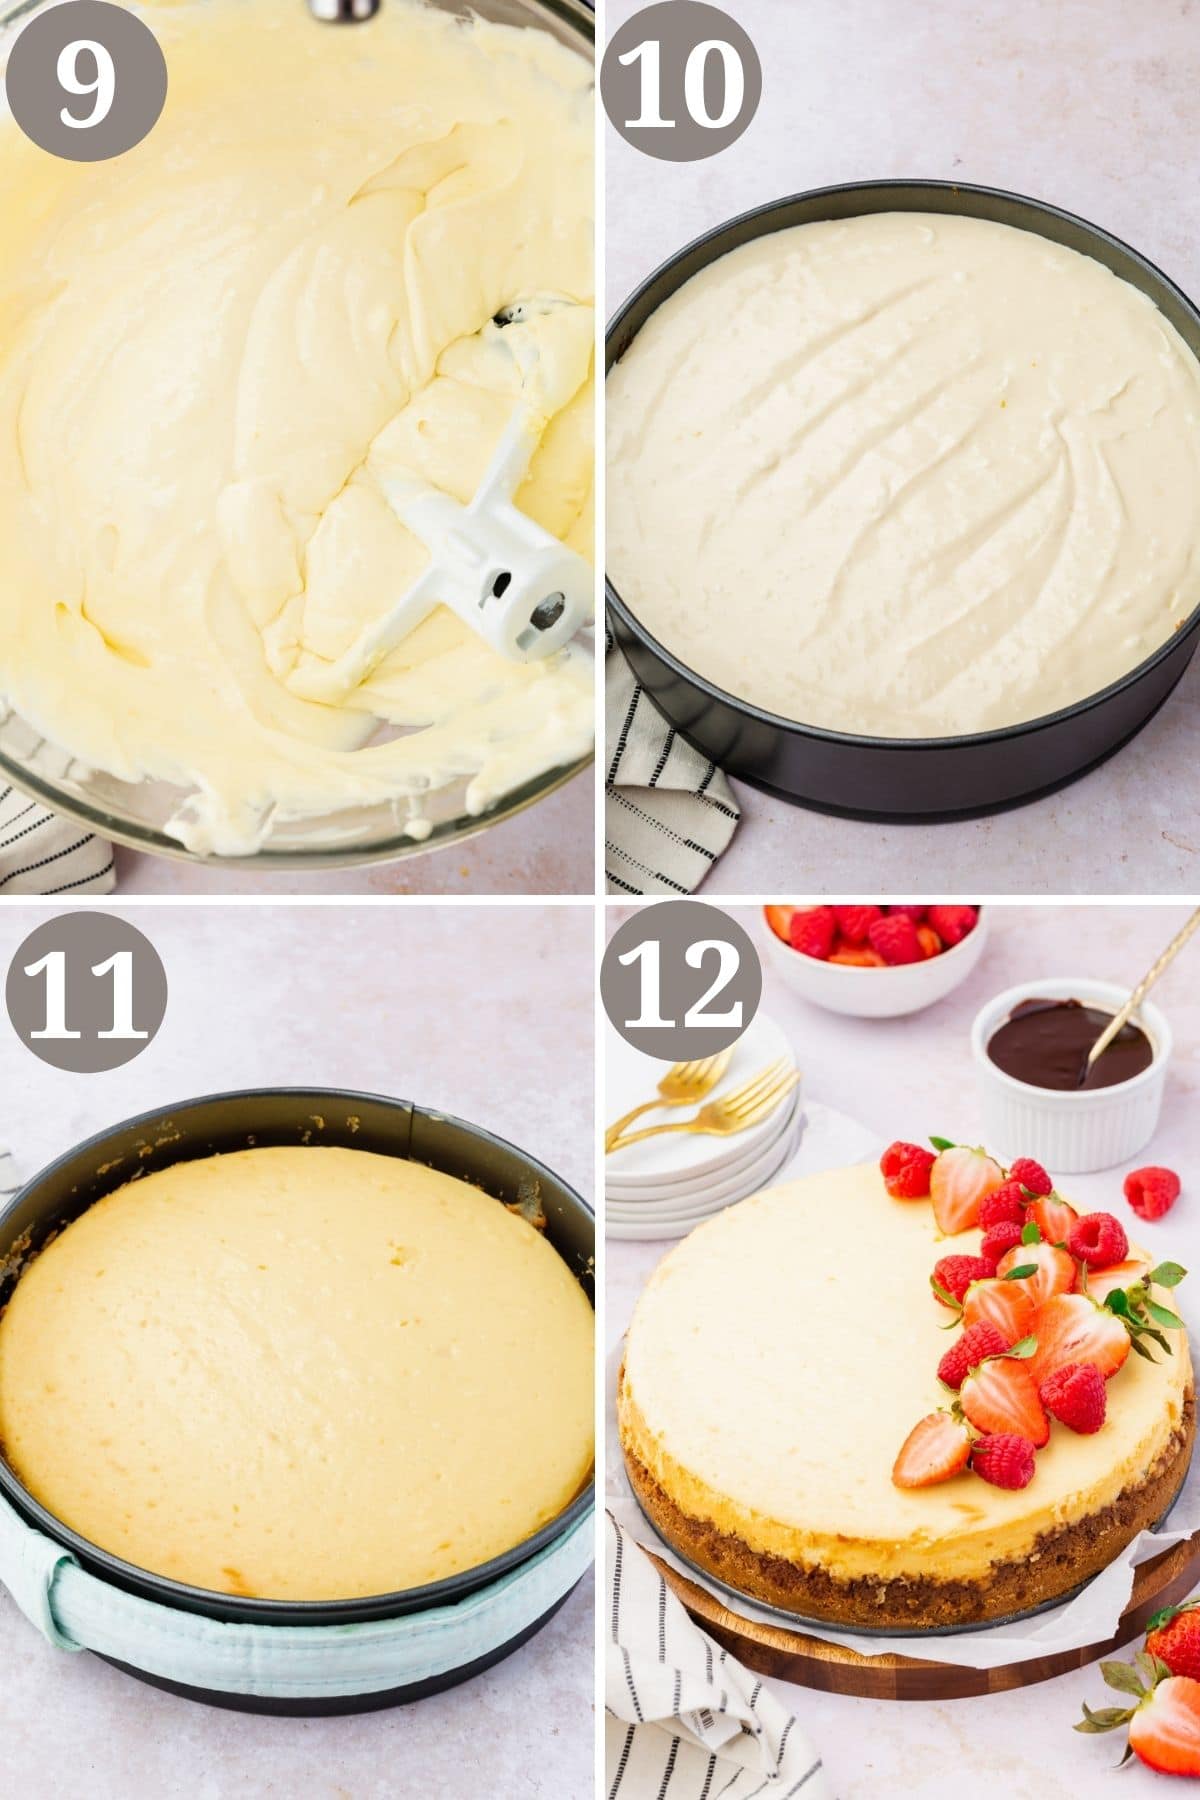 Steps 9-12 for making gluten-free cheesecake.